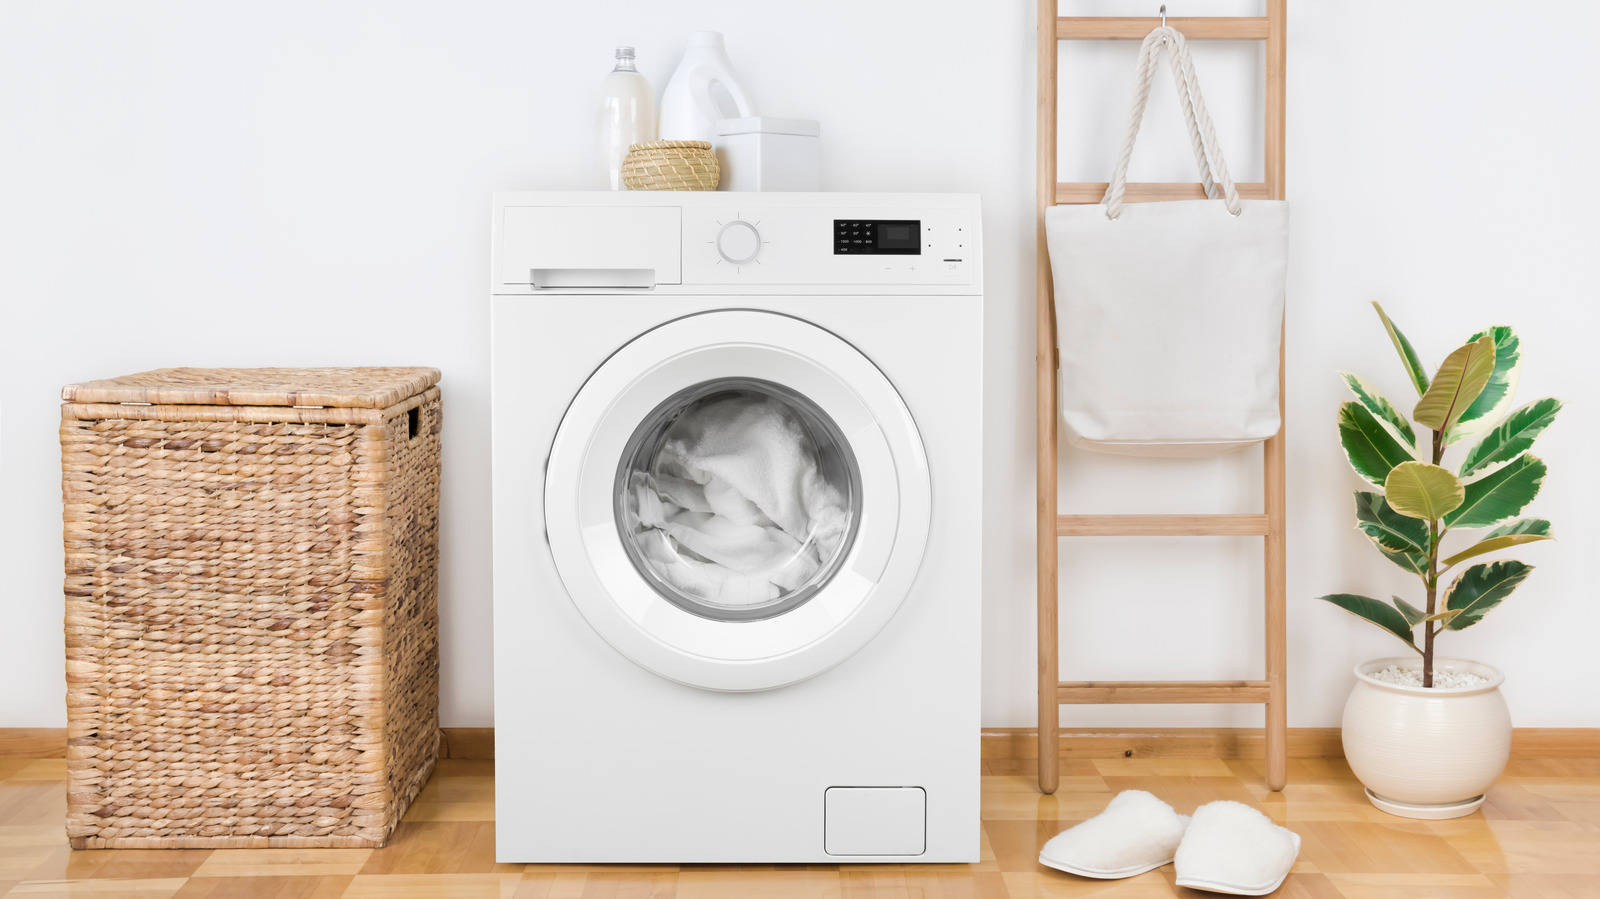 Why You Should Stop Using Homemade Laundry Detergents Immediately